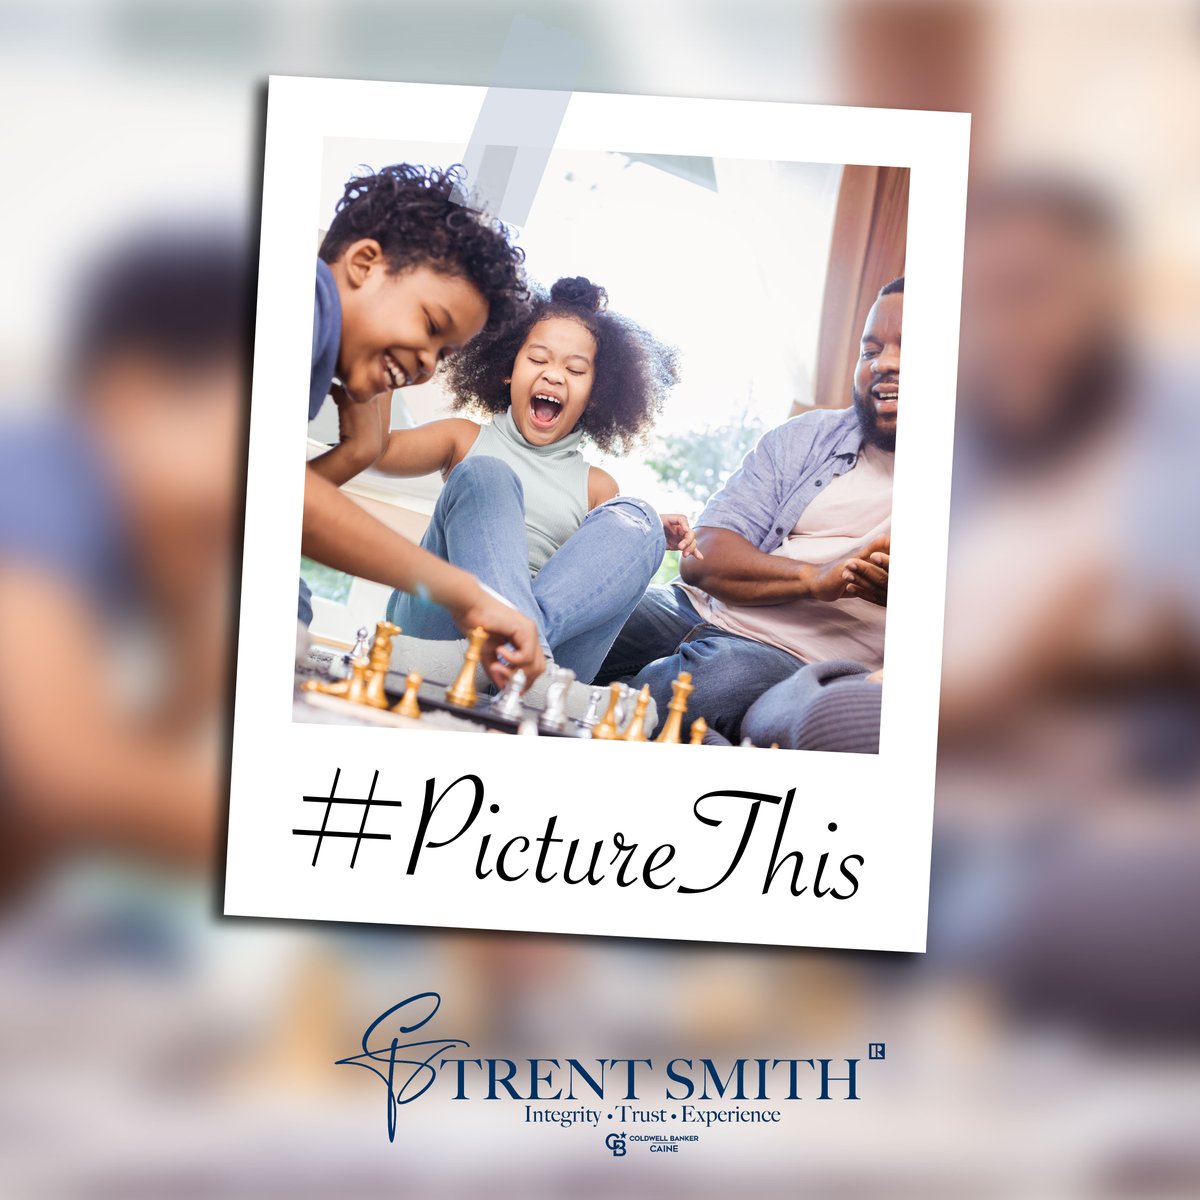 #PictureThis - Having family game nights in your new living room🎲

Give me a call TODAY! 📲 864.280.5308

#TrentSmith #UpstateSC #TrentSmith #GreenvilleSC #AndersonSC #ColdwellBanker #RealEstate #realtor #firsttimehomebuyer #newhome #finance